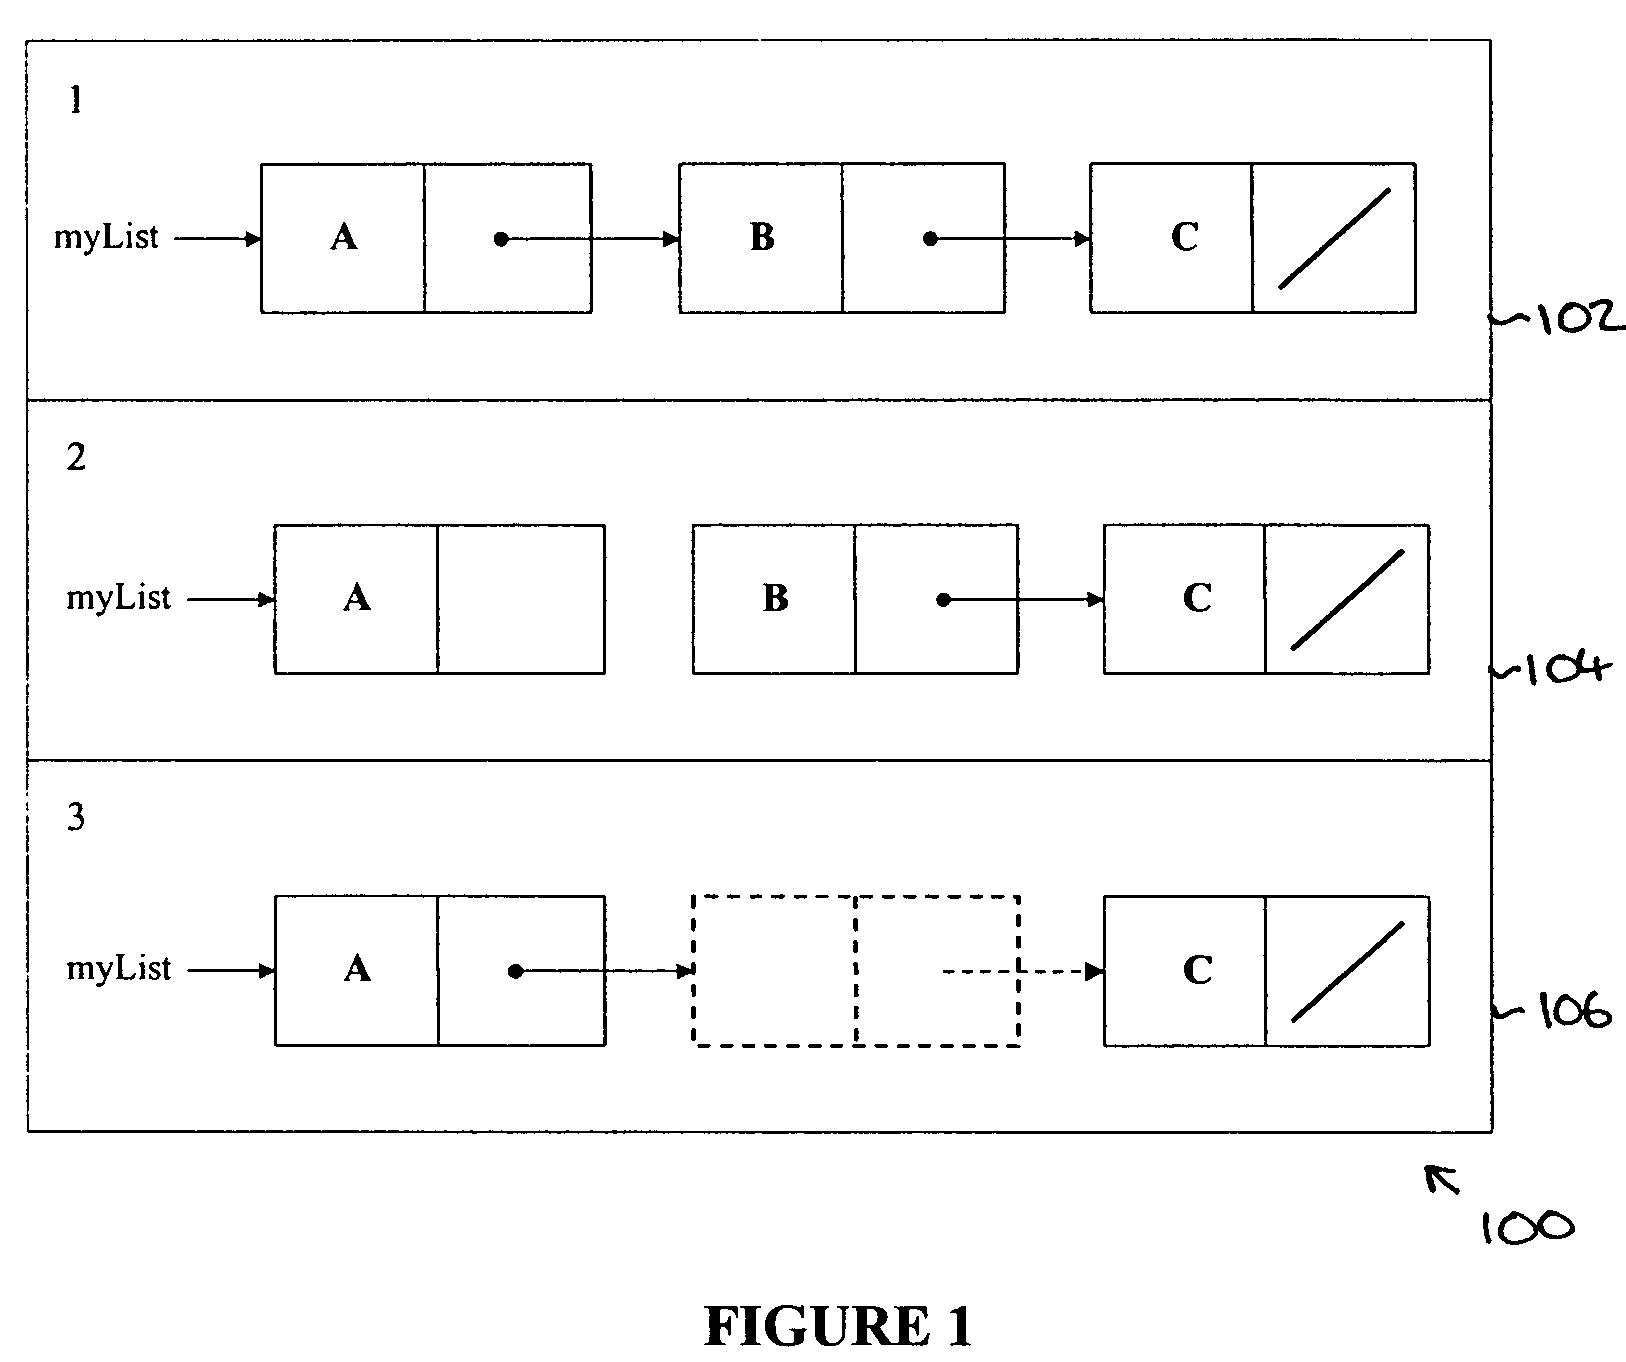 System and method for garbage collection in a computer system, which uses reinforcement learning to adjust the allocation of memory space, calculate a reward, and use the reward to determine further actions to be taken on the memory space